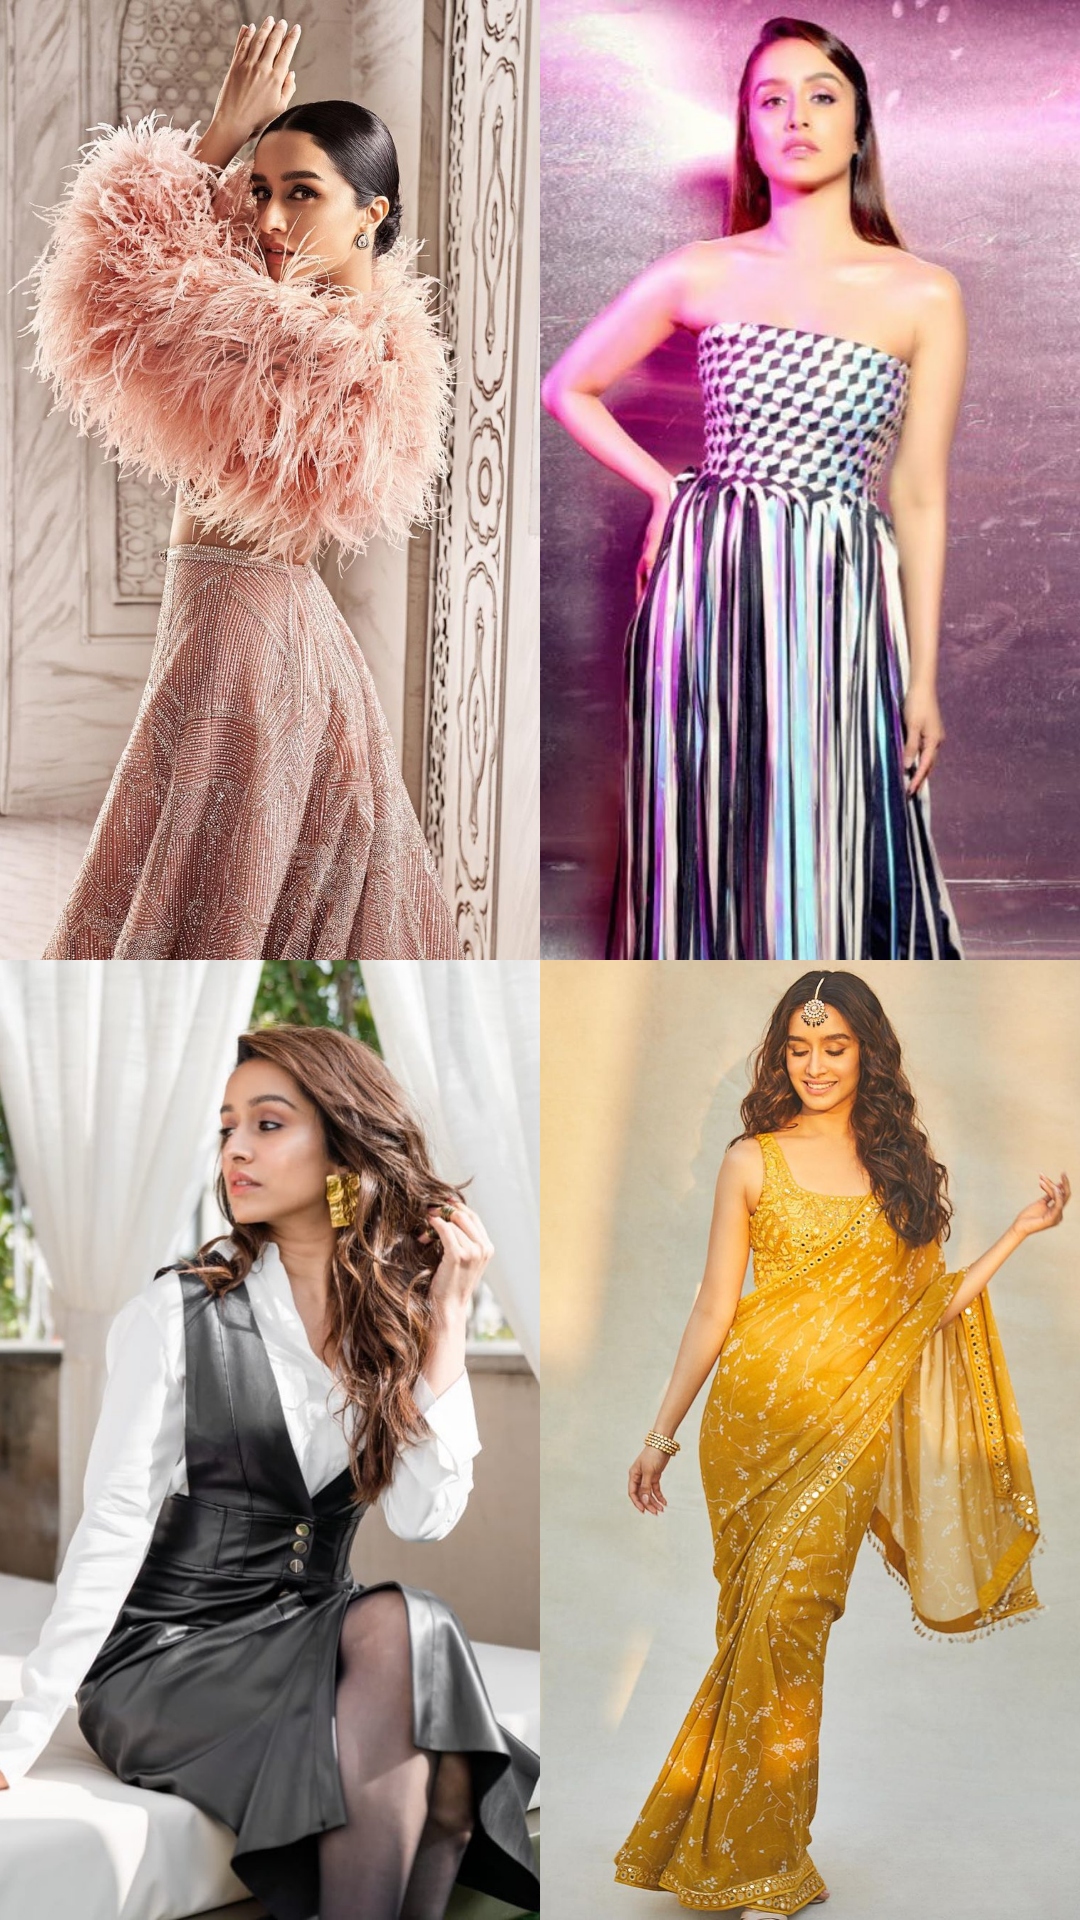 Shraddha Kapoor gives some serious fashion goals with her IIFA outfits!